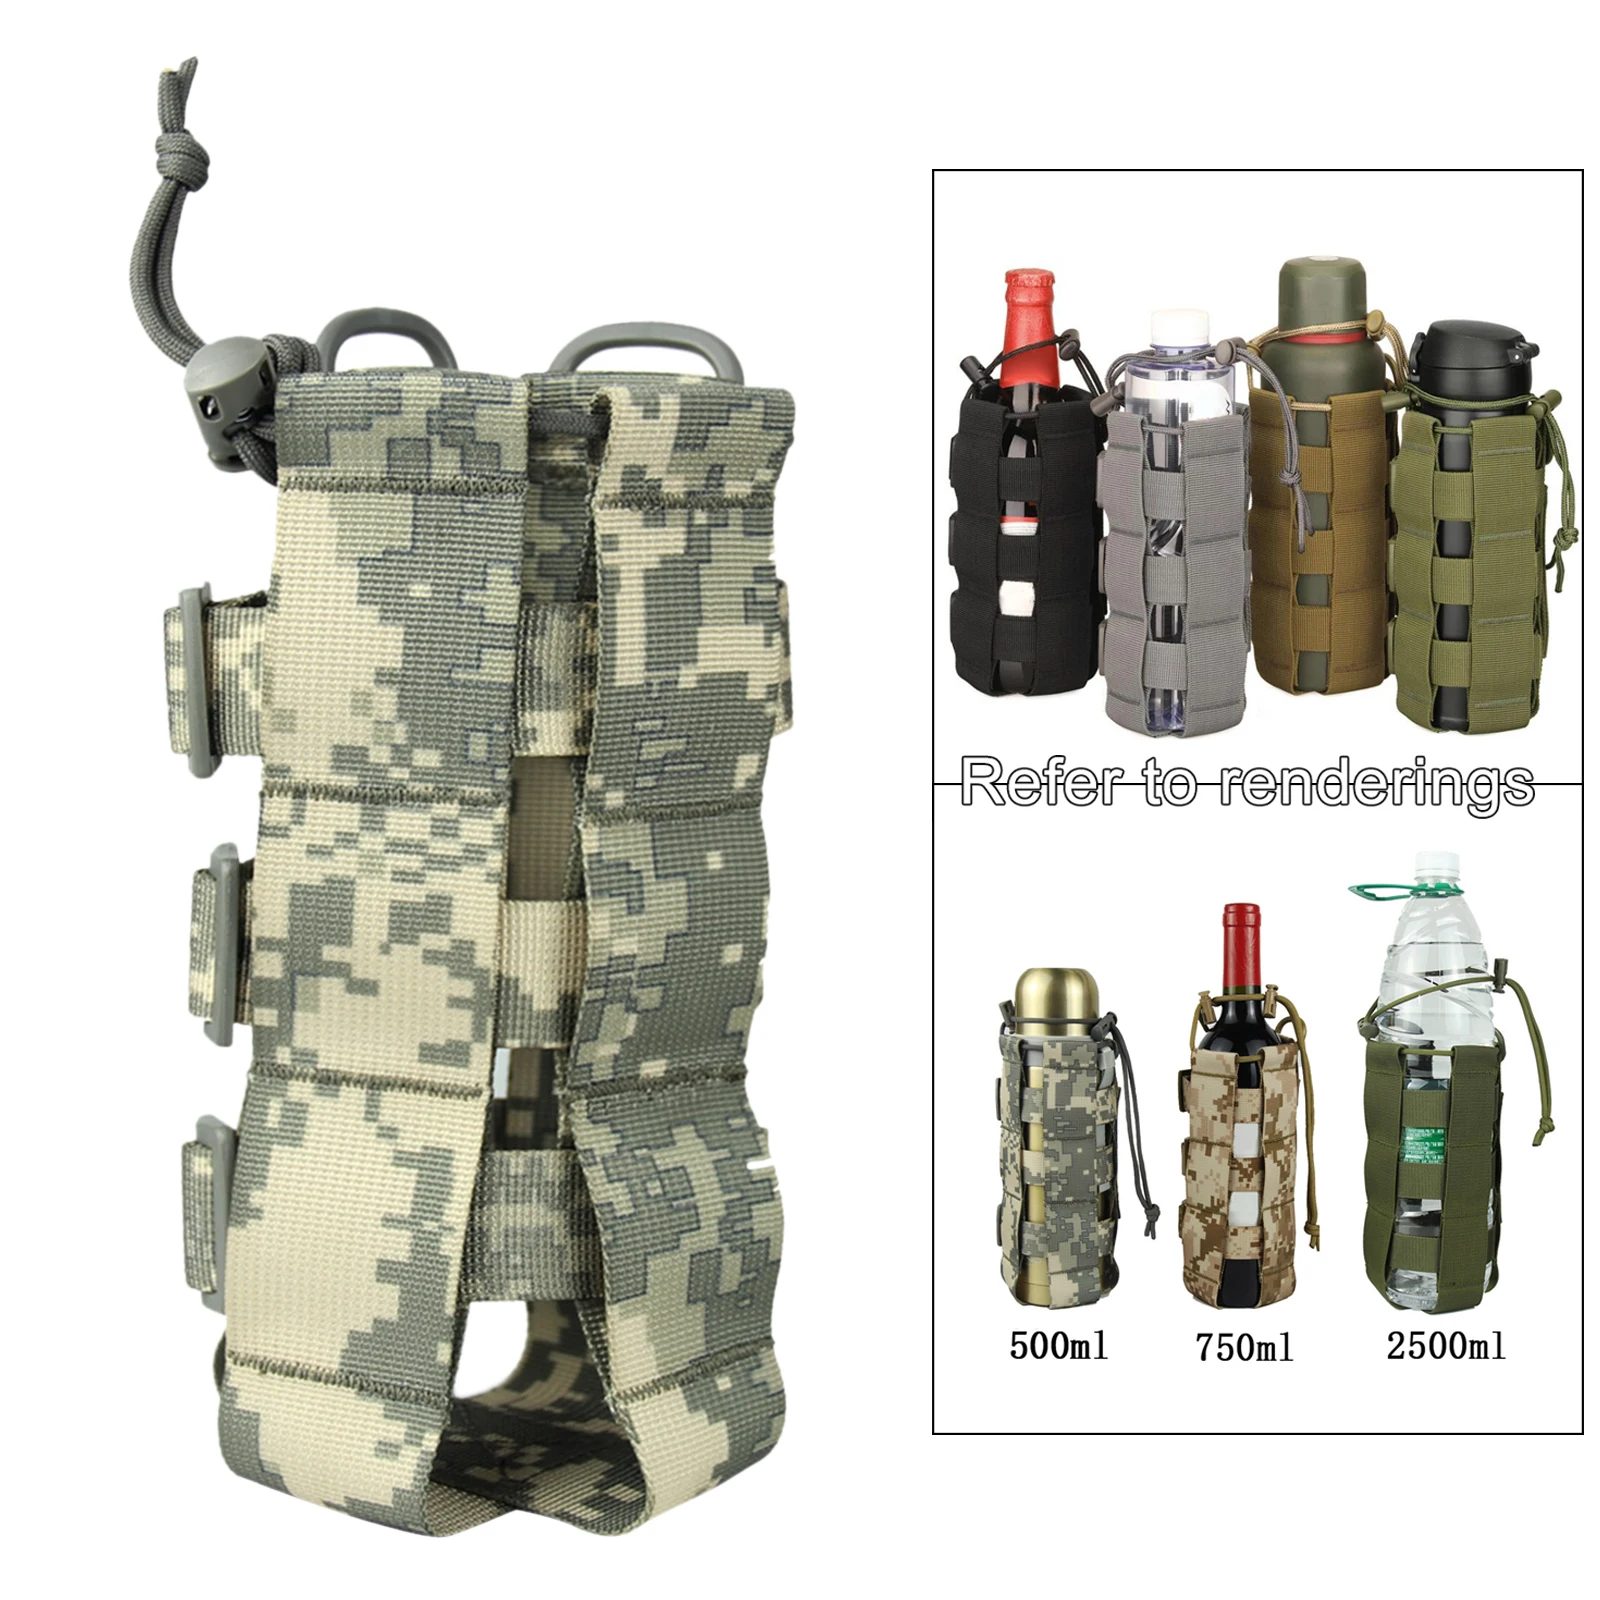 0.3L-0.8L Tactical Molle Water Bottle Pouch Military Canteen Cover Holster Outdoor Travel Kettle Bag for Hiking Camping Outdoor